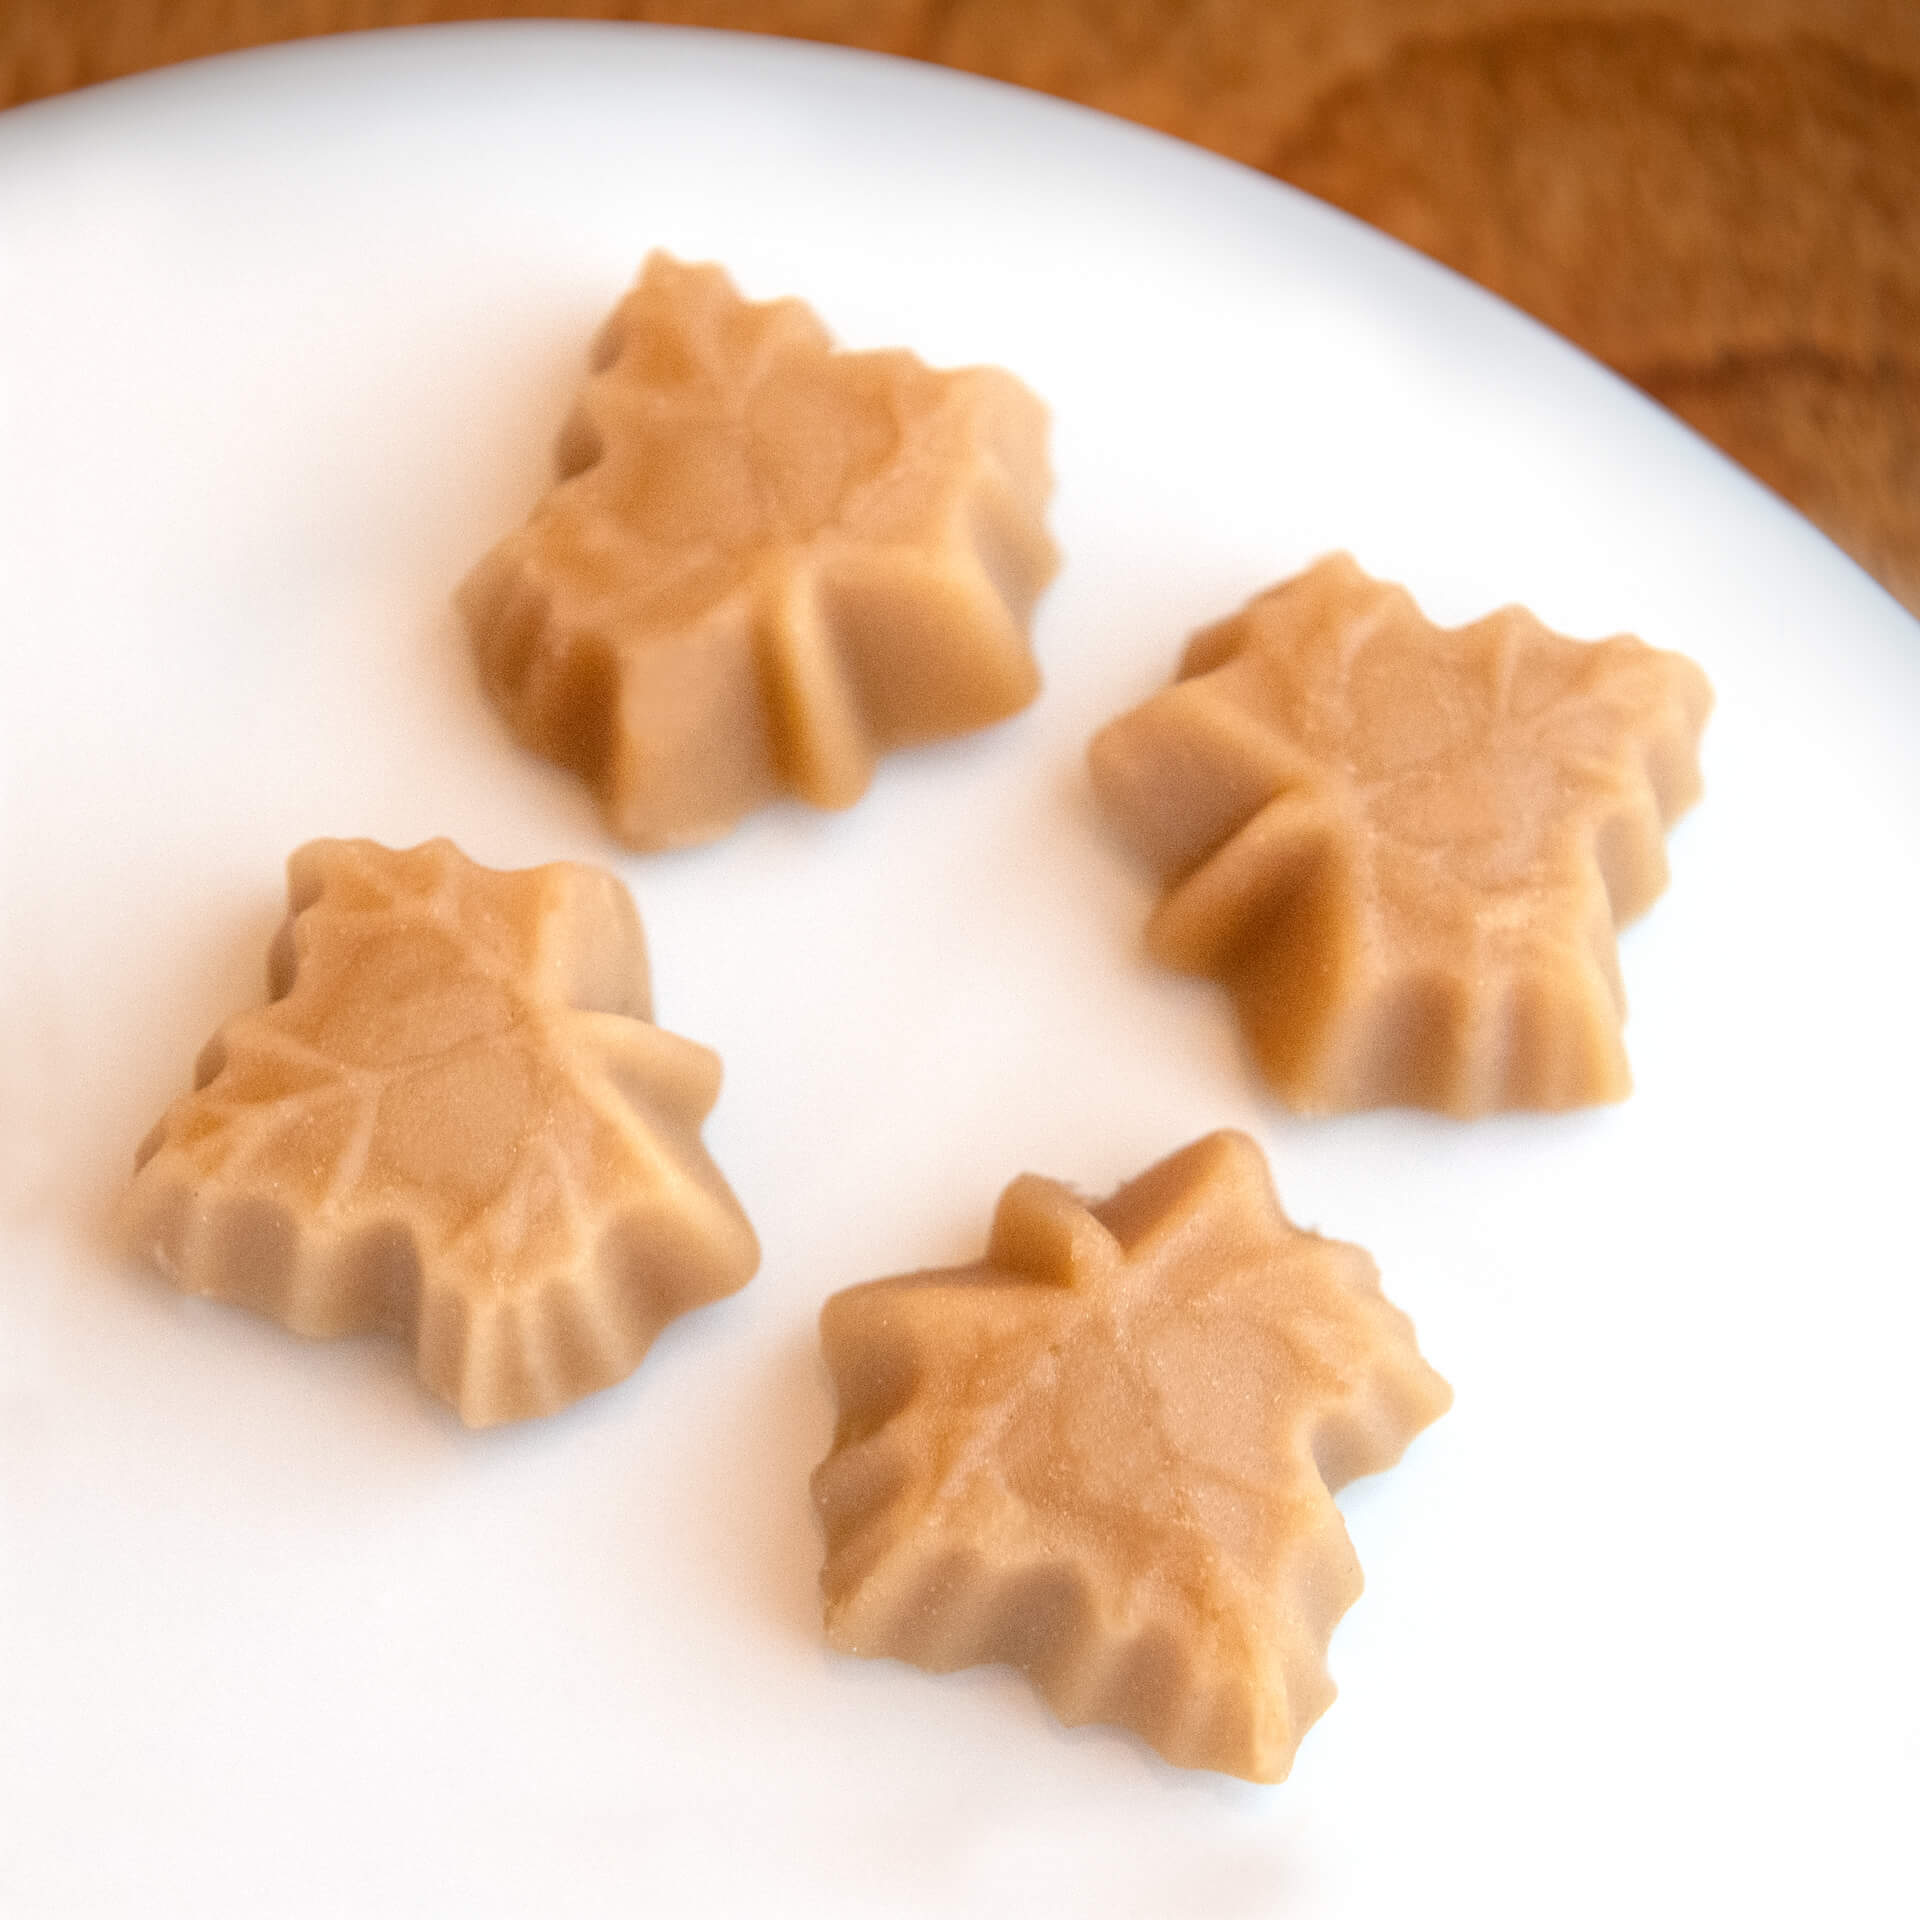 maple syrup candy